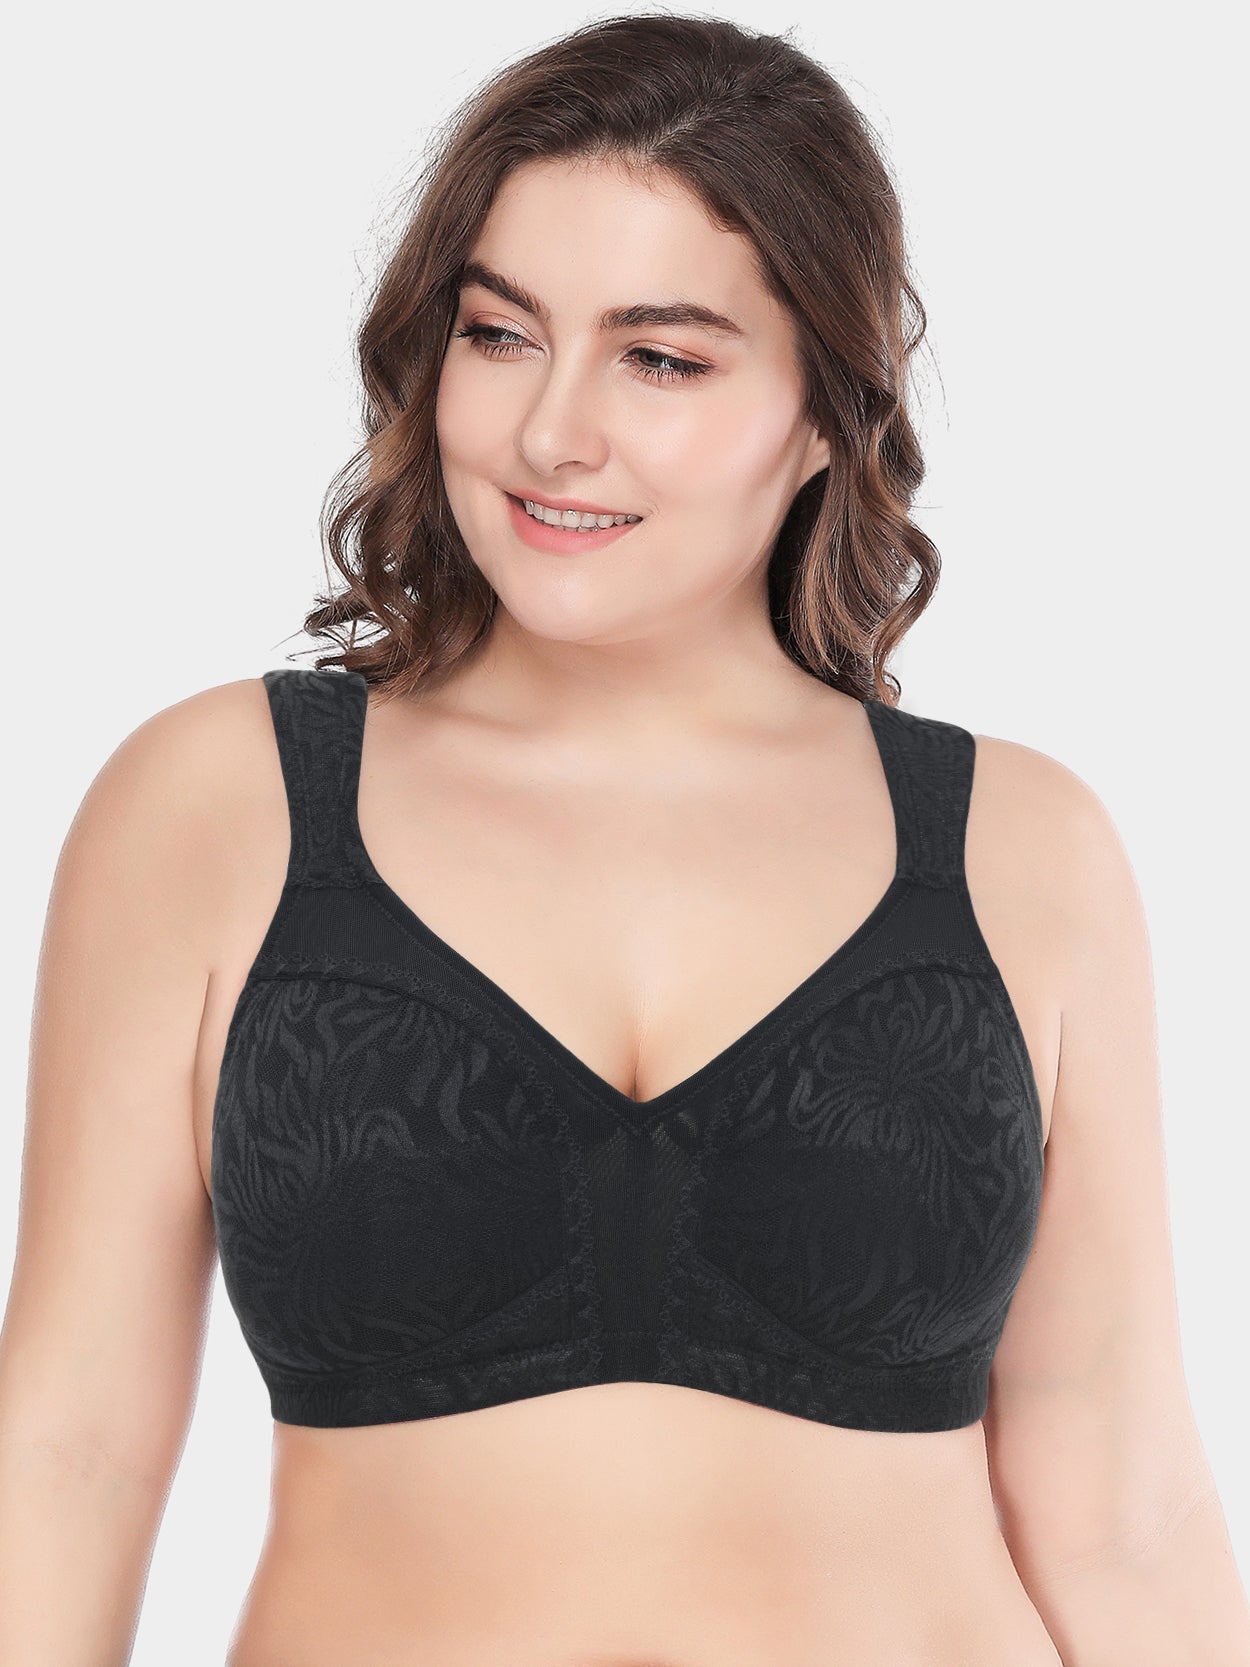 Womens Plus Size Bras Minimizer Underwire Full Coverage Unlined Seamless  Cup Black 46DD